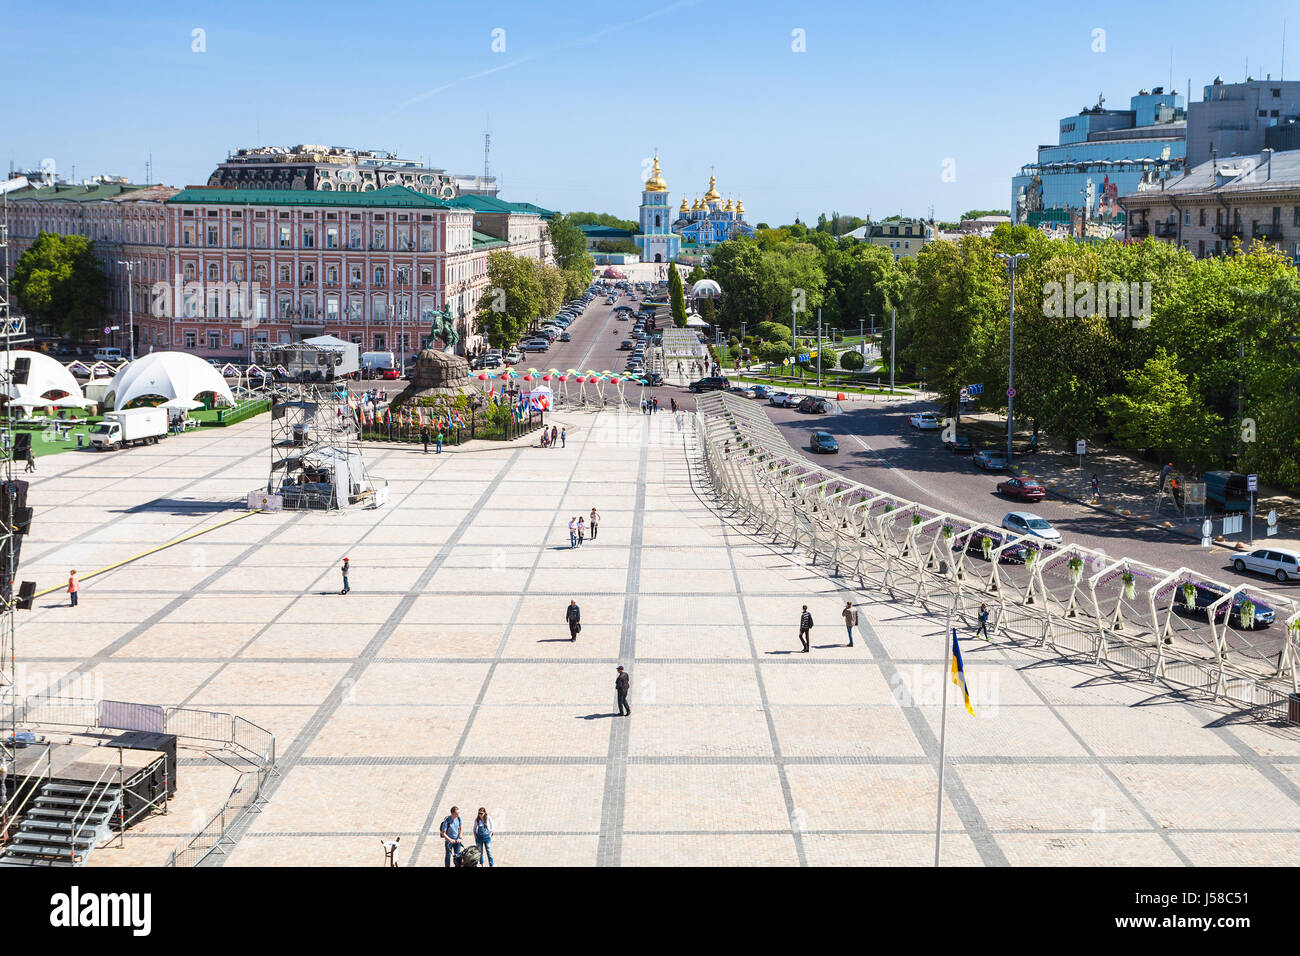 KIEV, UKRAINE - MAY 5, 2017: view of people and monument of Bohdan Khmelnytsky on St Sophia Square and Saint Michael's Golden-Domed Monastery in Kiev  Stock Photo